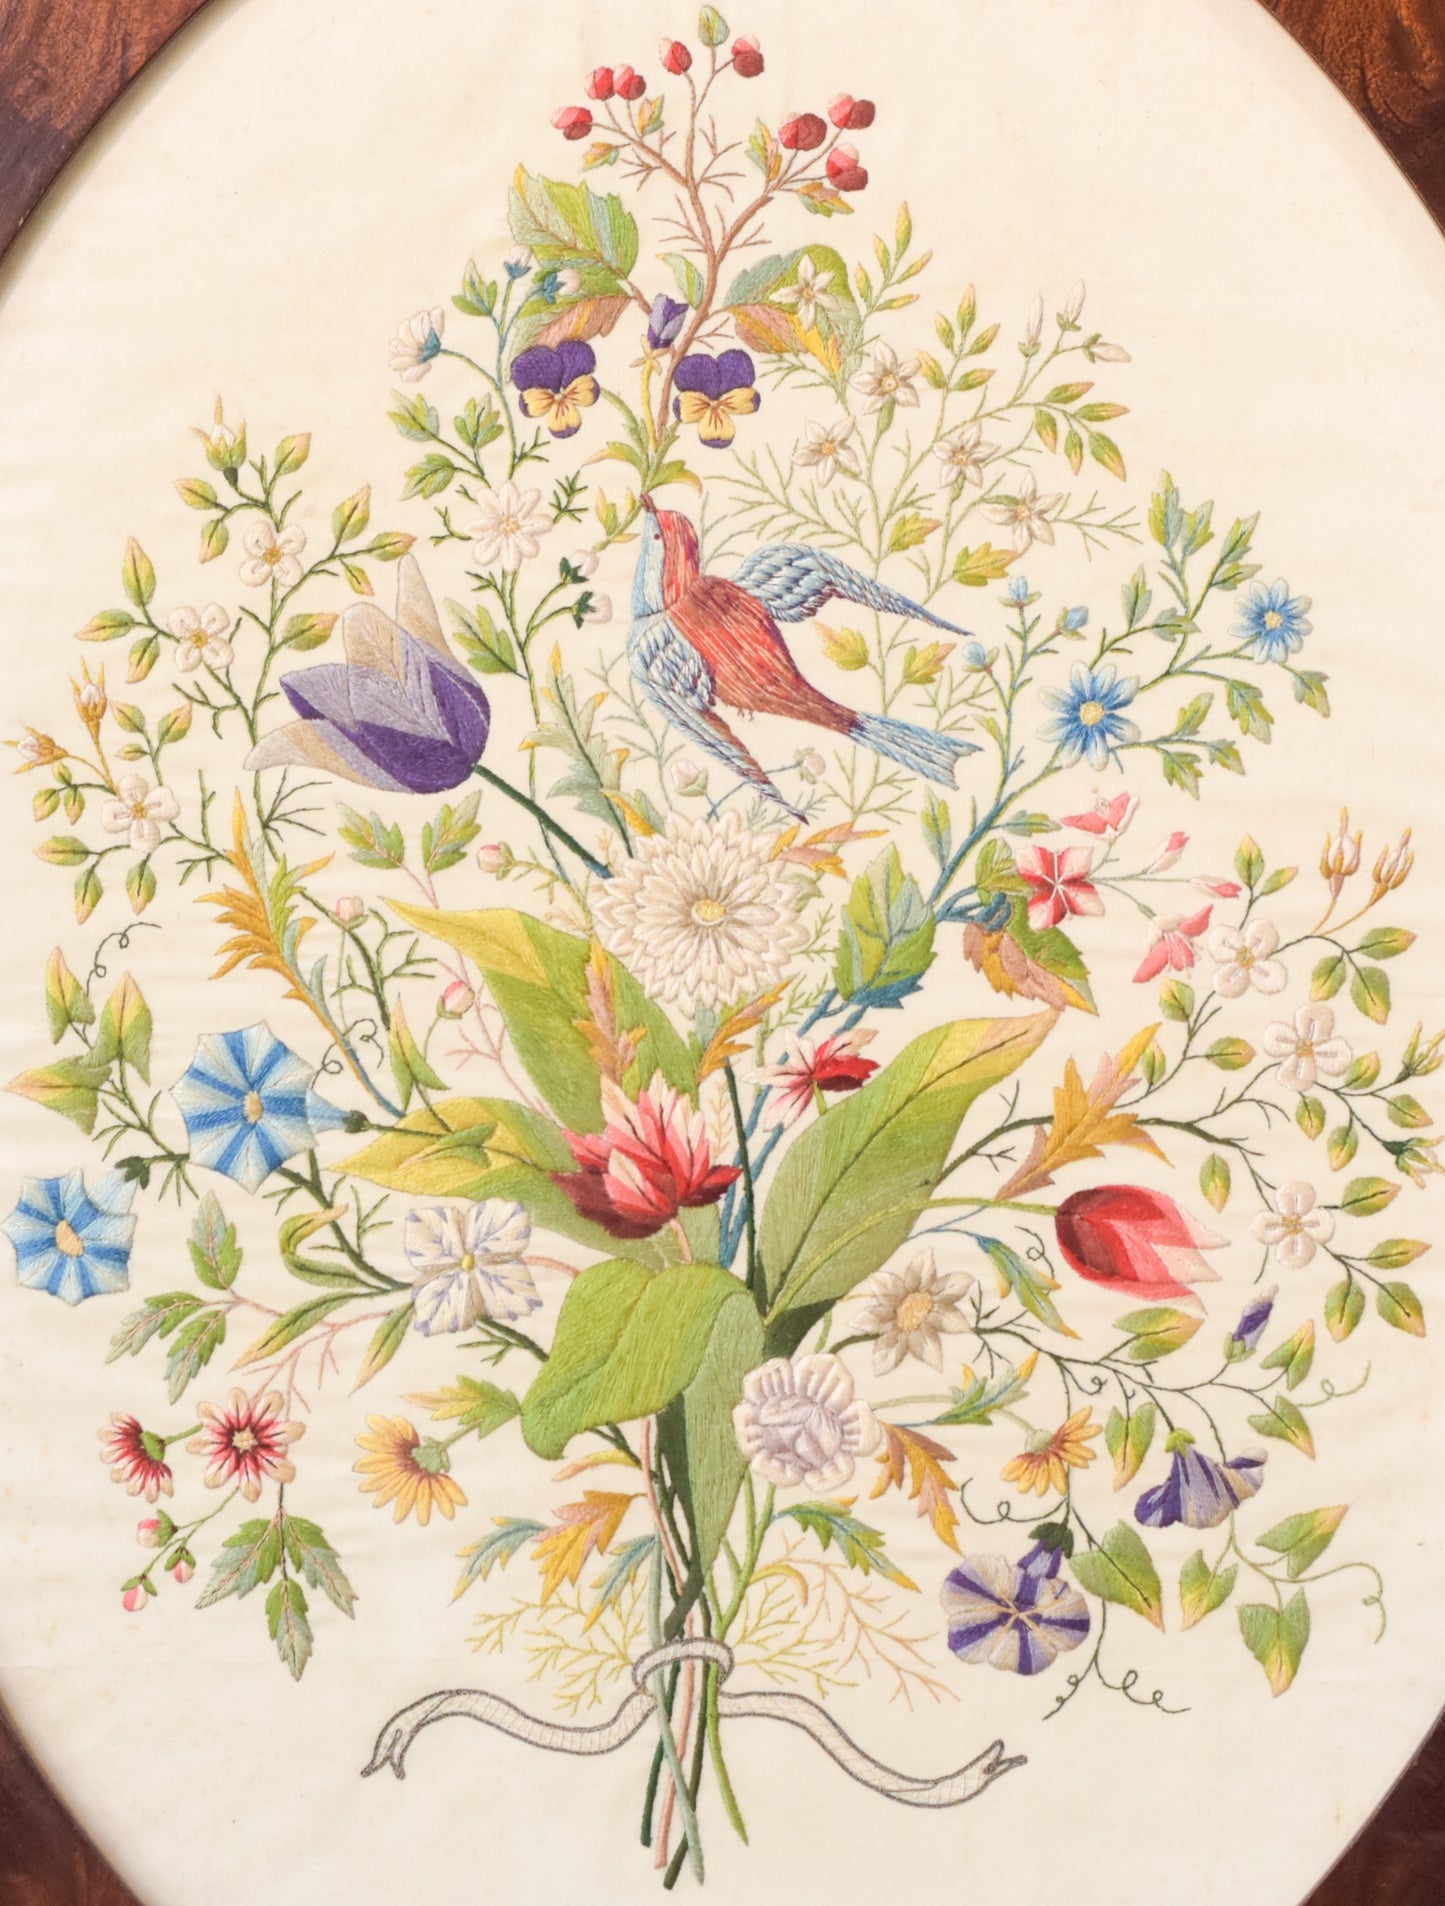 Framed - Embroidery with Flowers and Birds